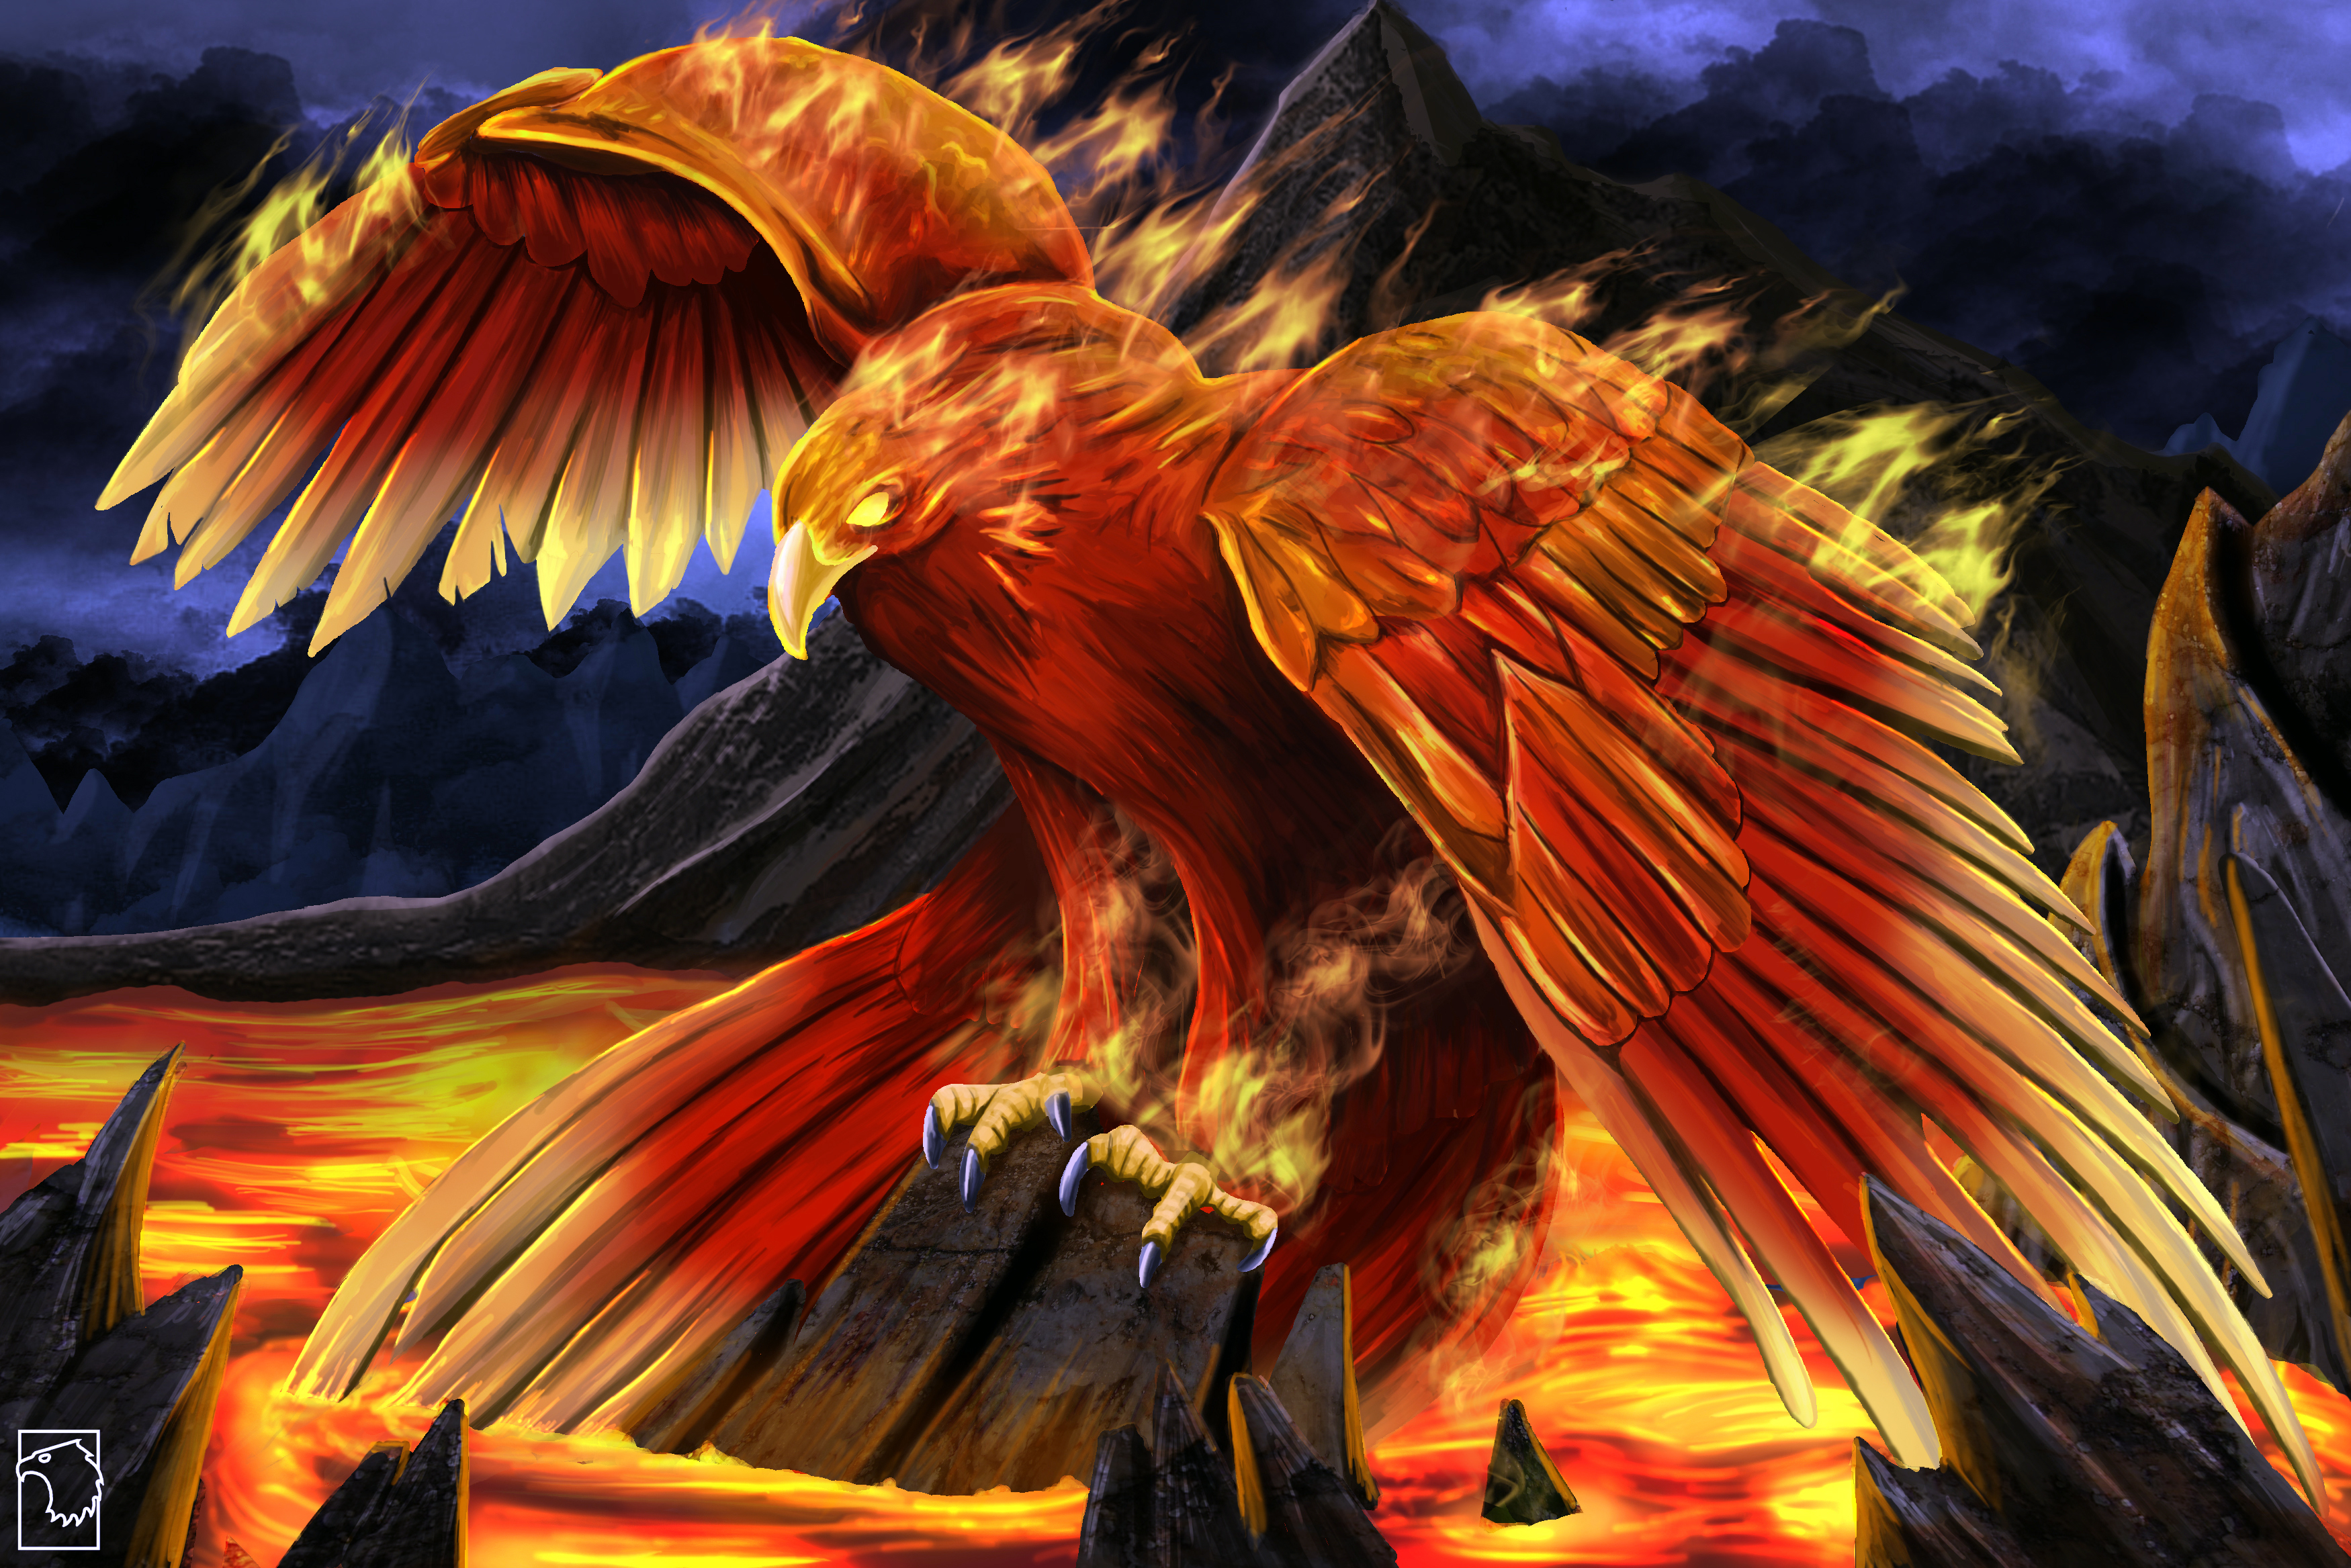 Eagle With Fire Flames On A Black Background 3d Rendering Stock Photo  Picture And Royalty Free Image 198352845